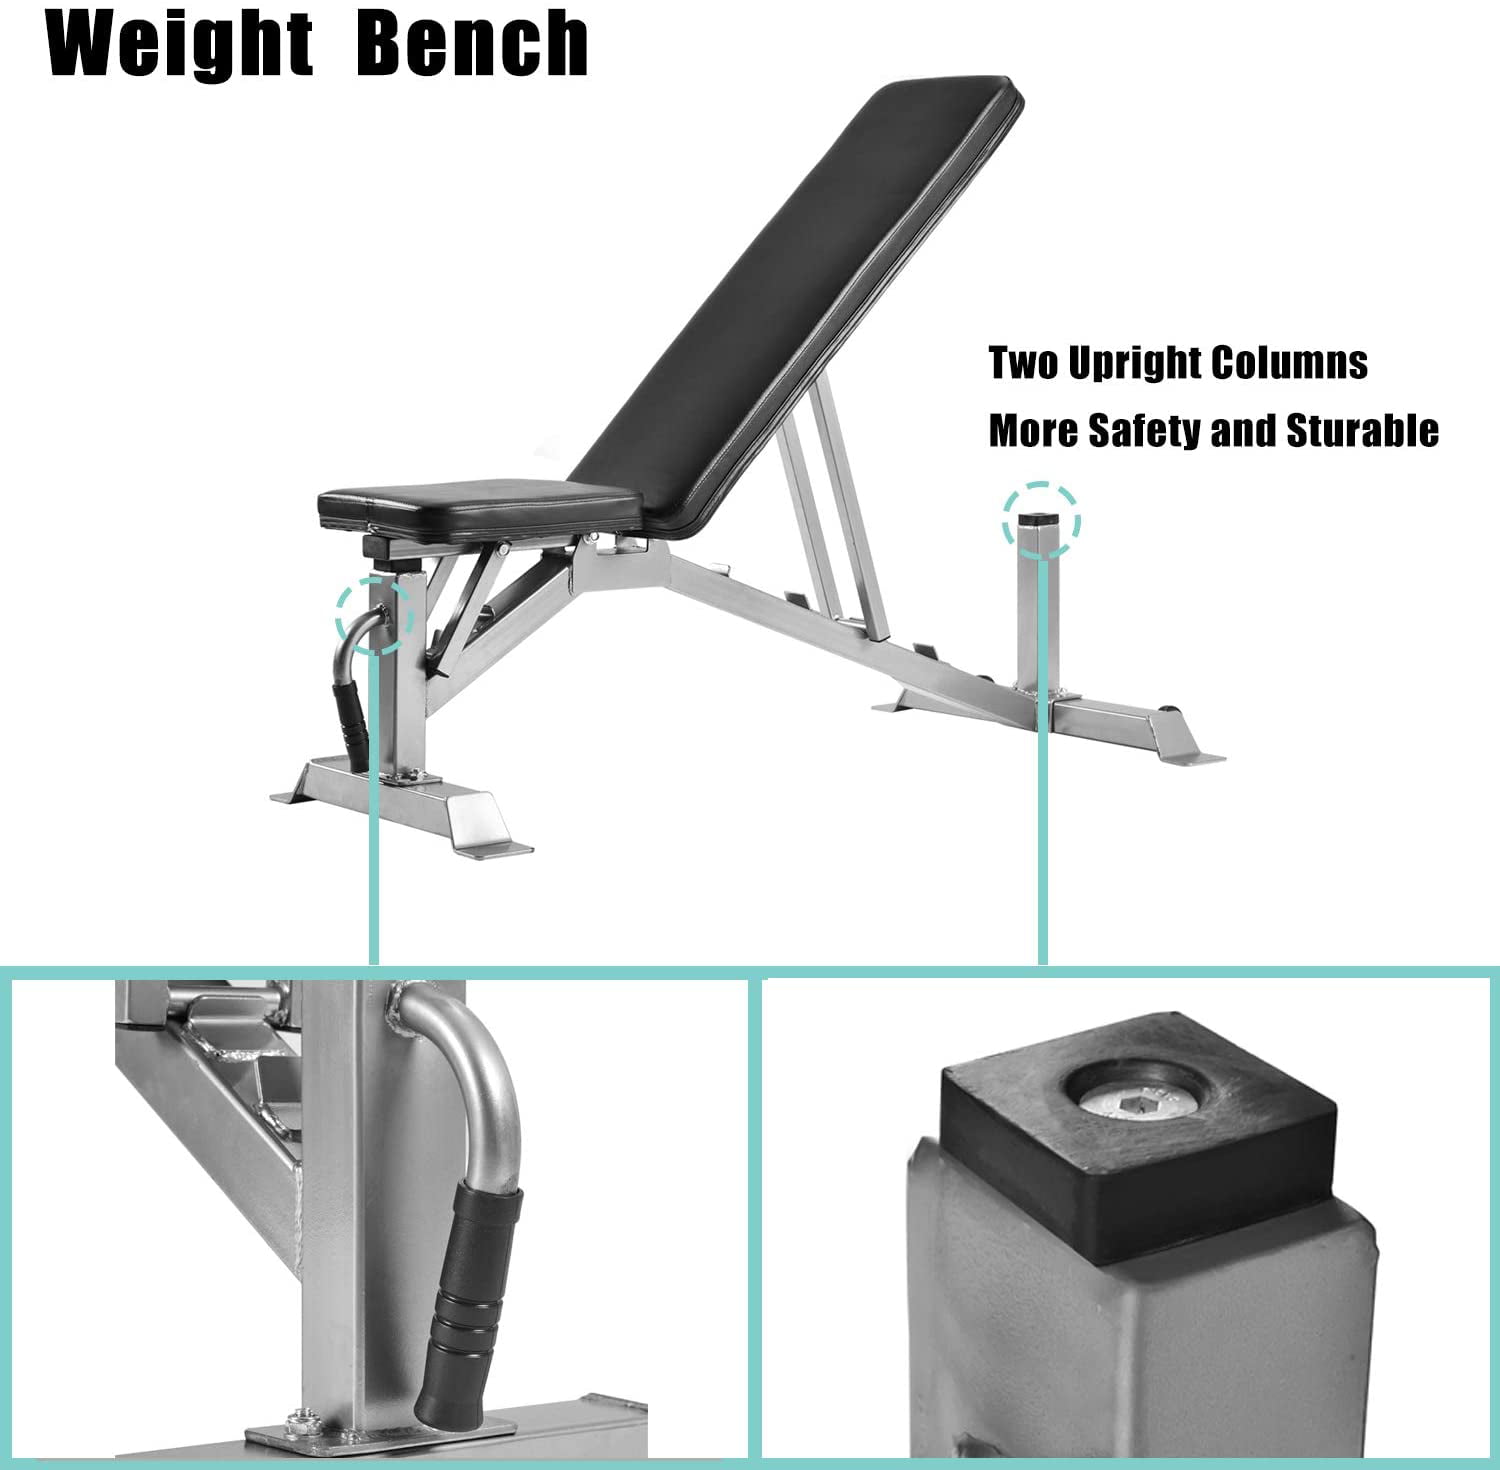 Weight Bench Adjustable Strength Training for Full Body Workout Fast Folding2020 